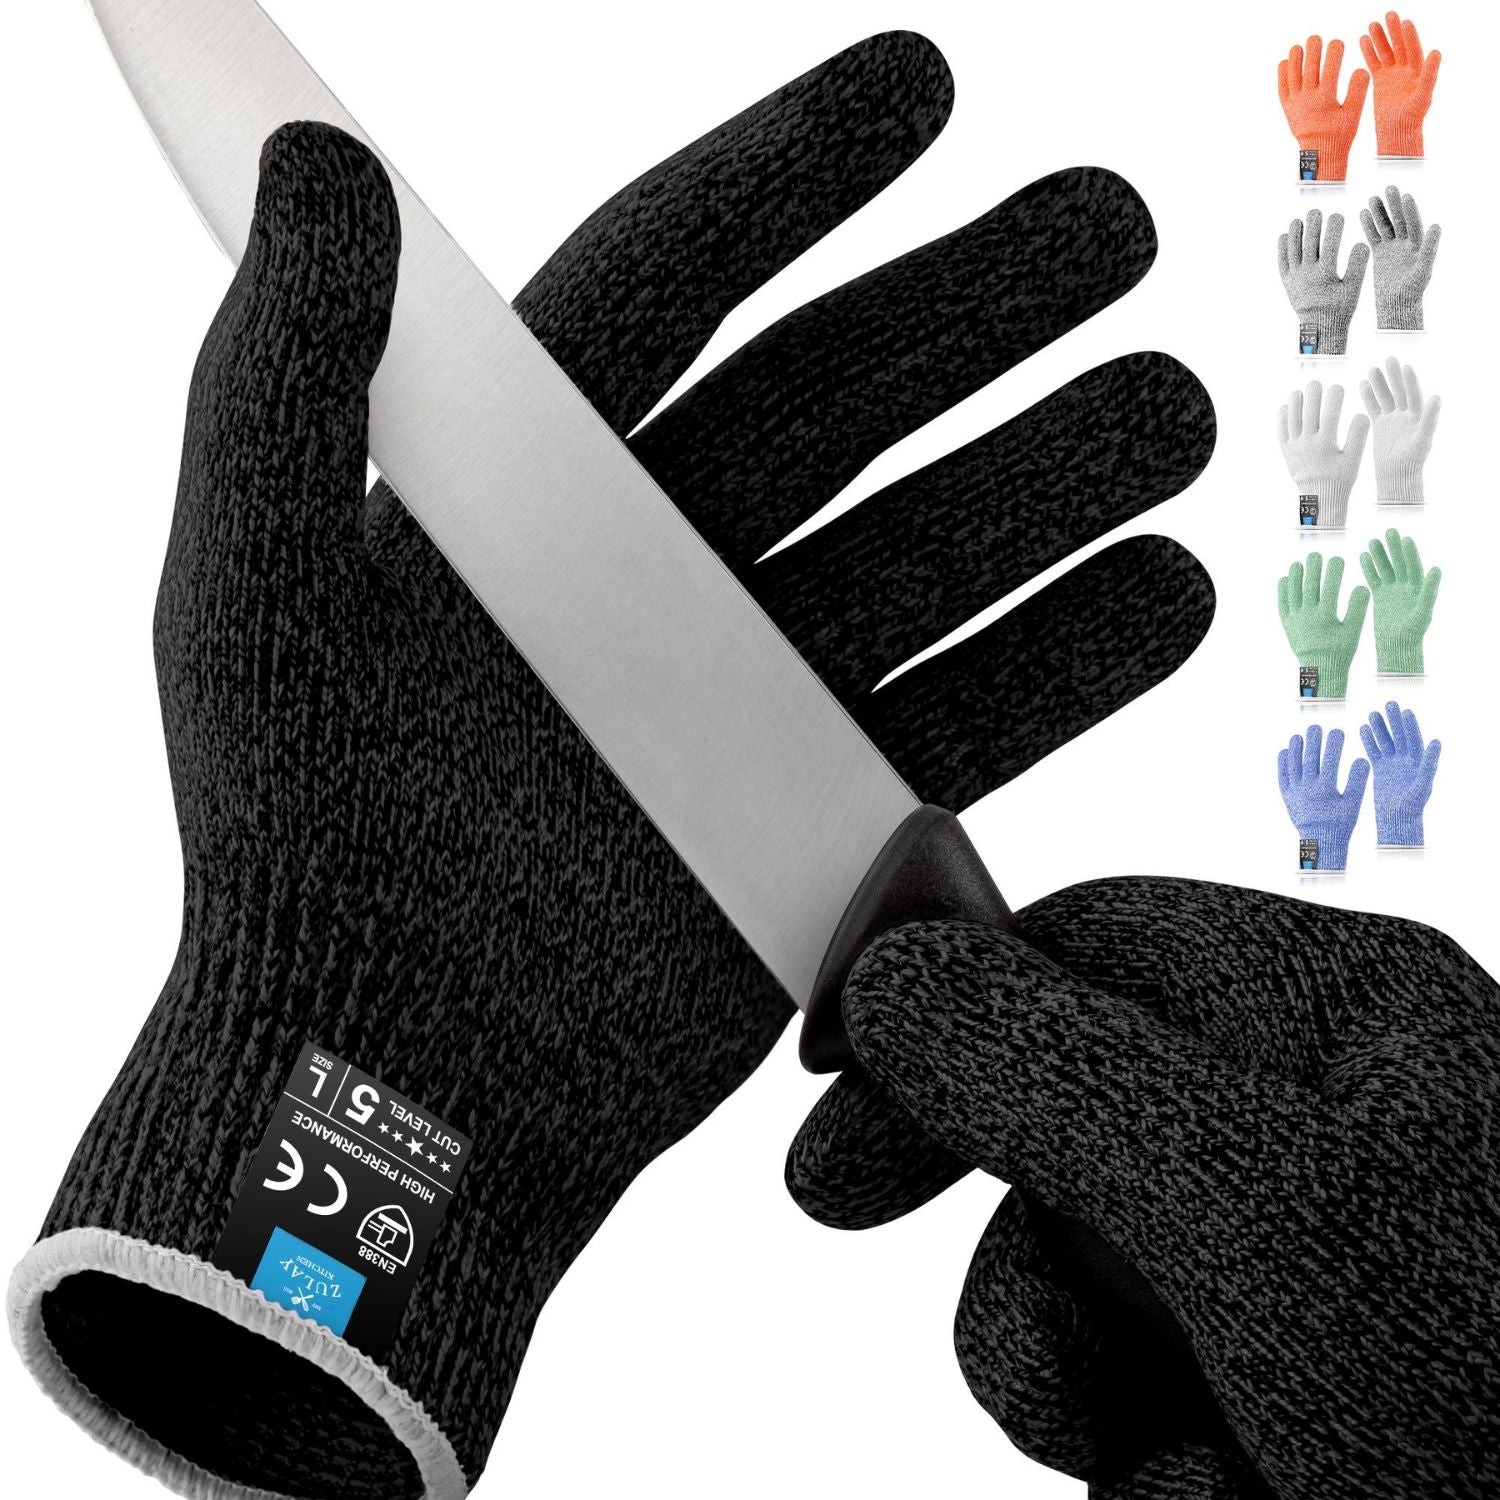 Cut Resistant Gloves Food Grade Level 5 Protection Medium - White